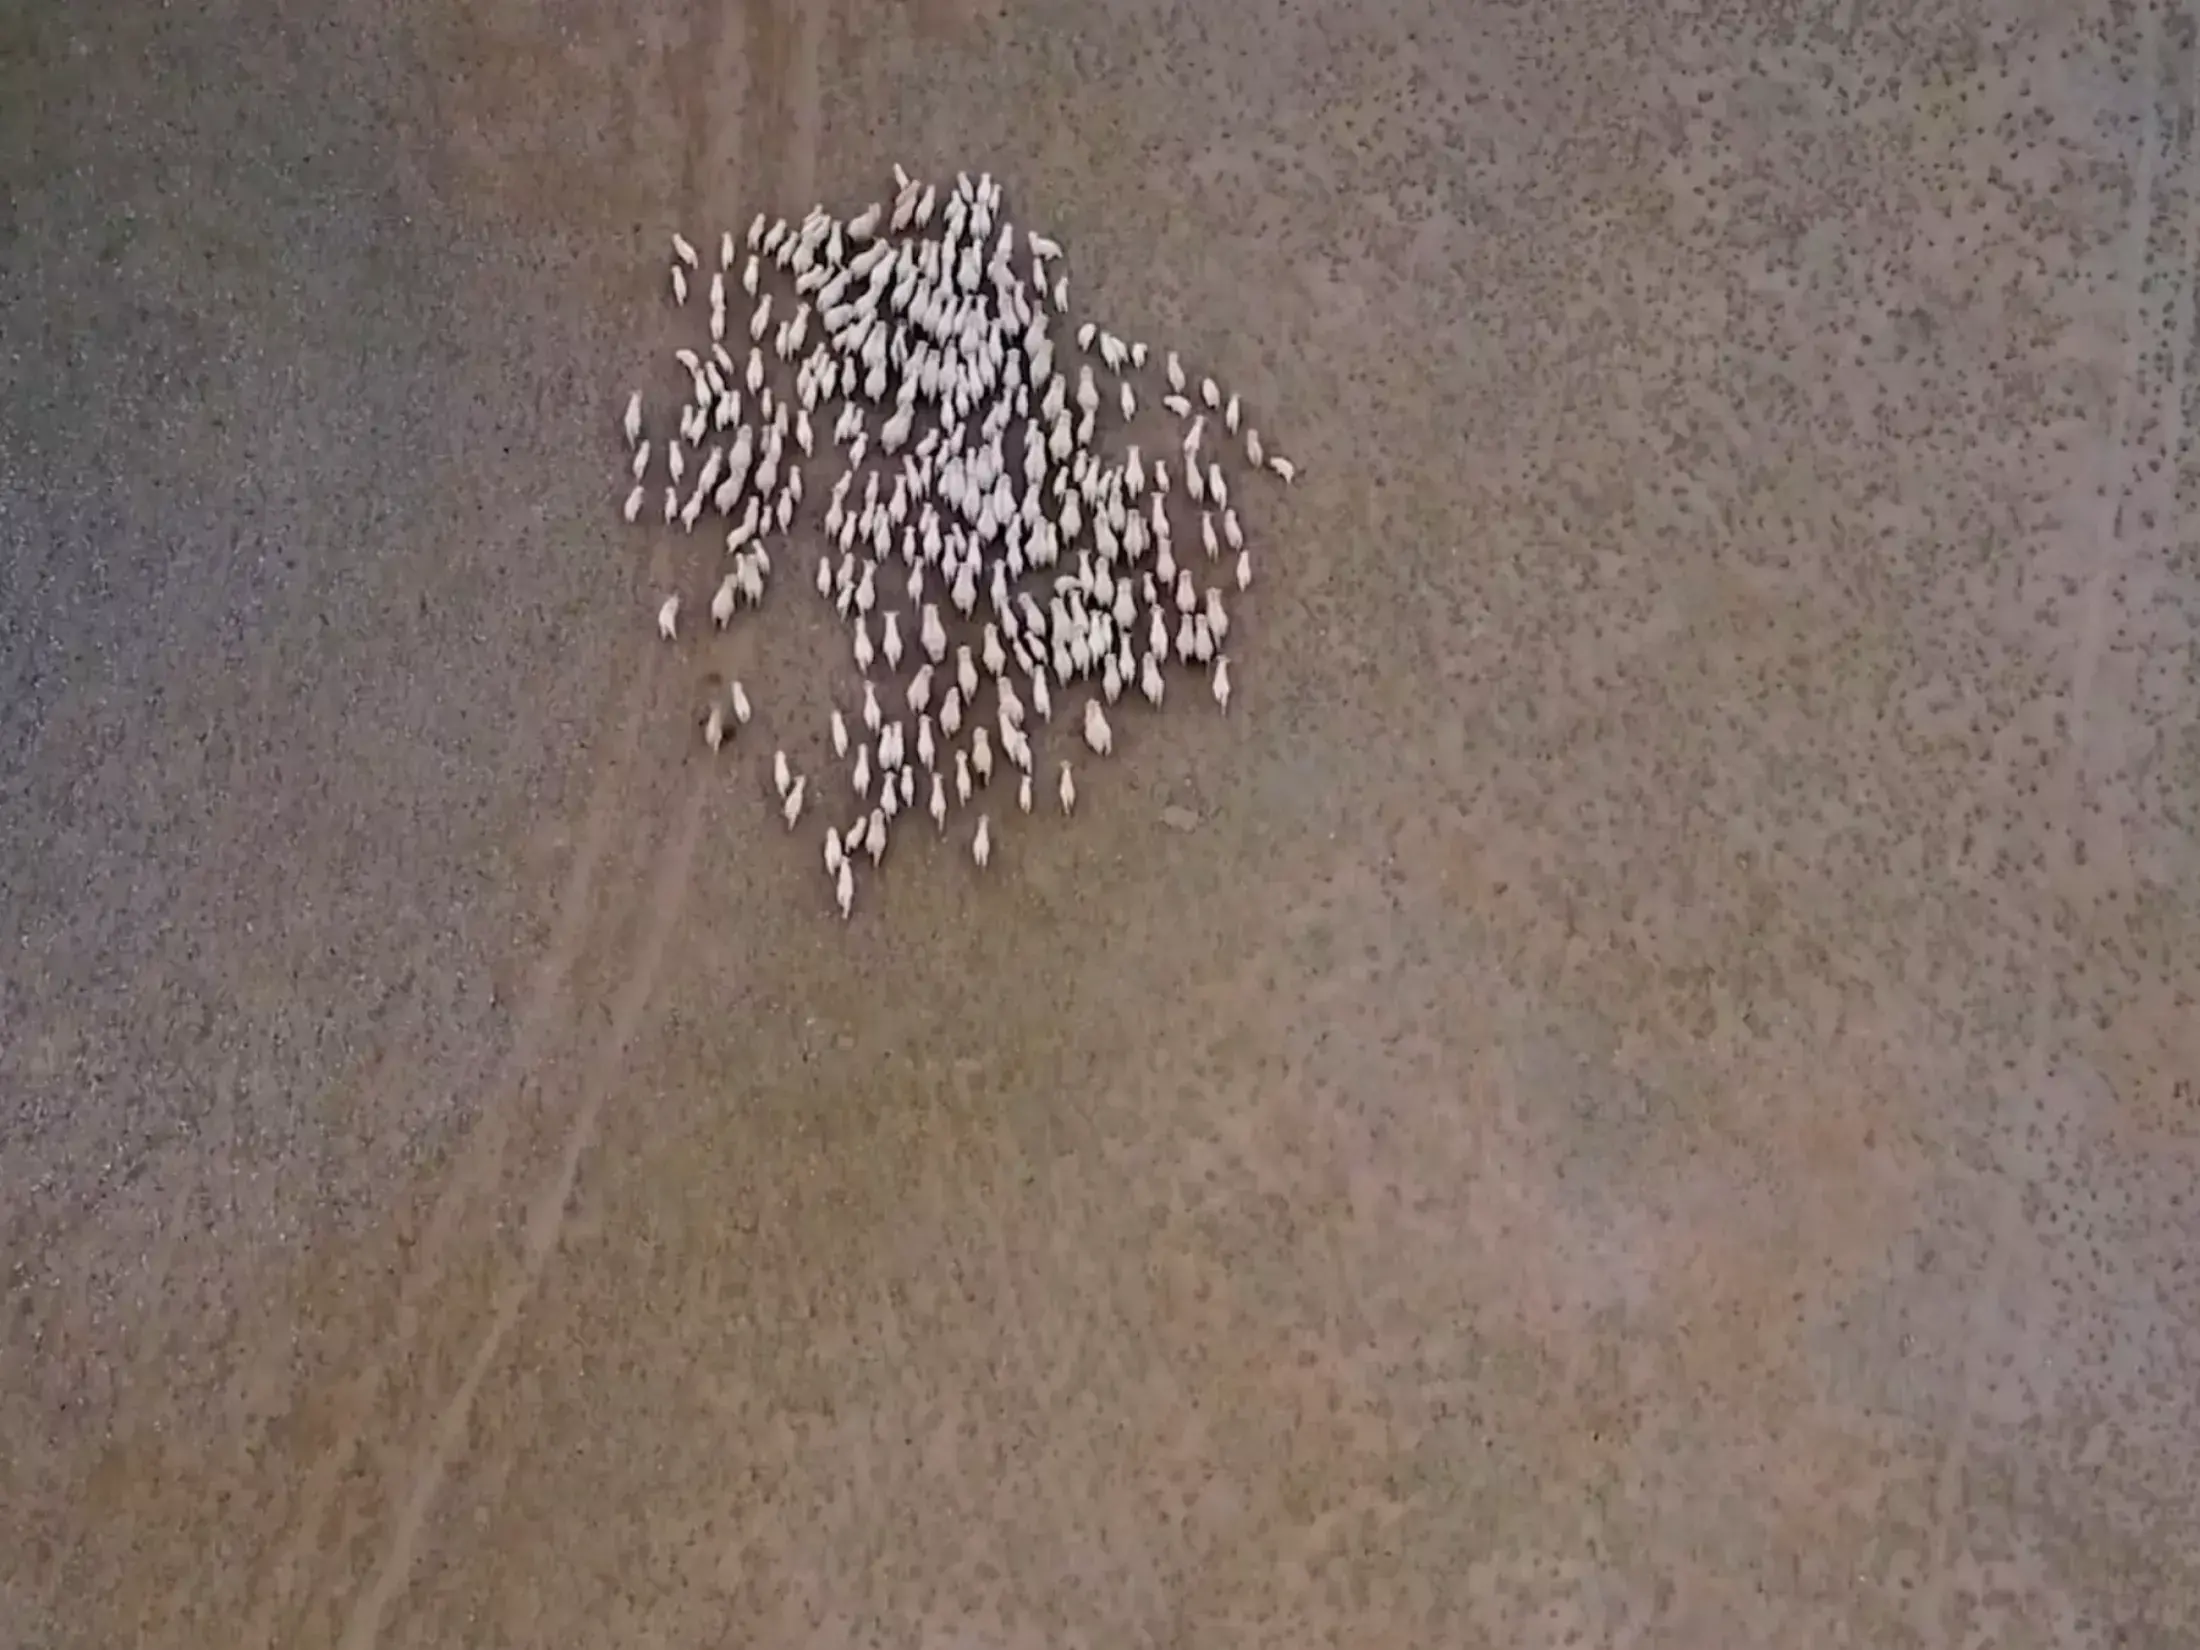 Overhead view of a herd of goat in an open plain